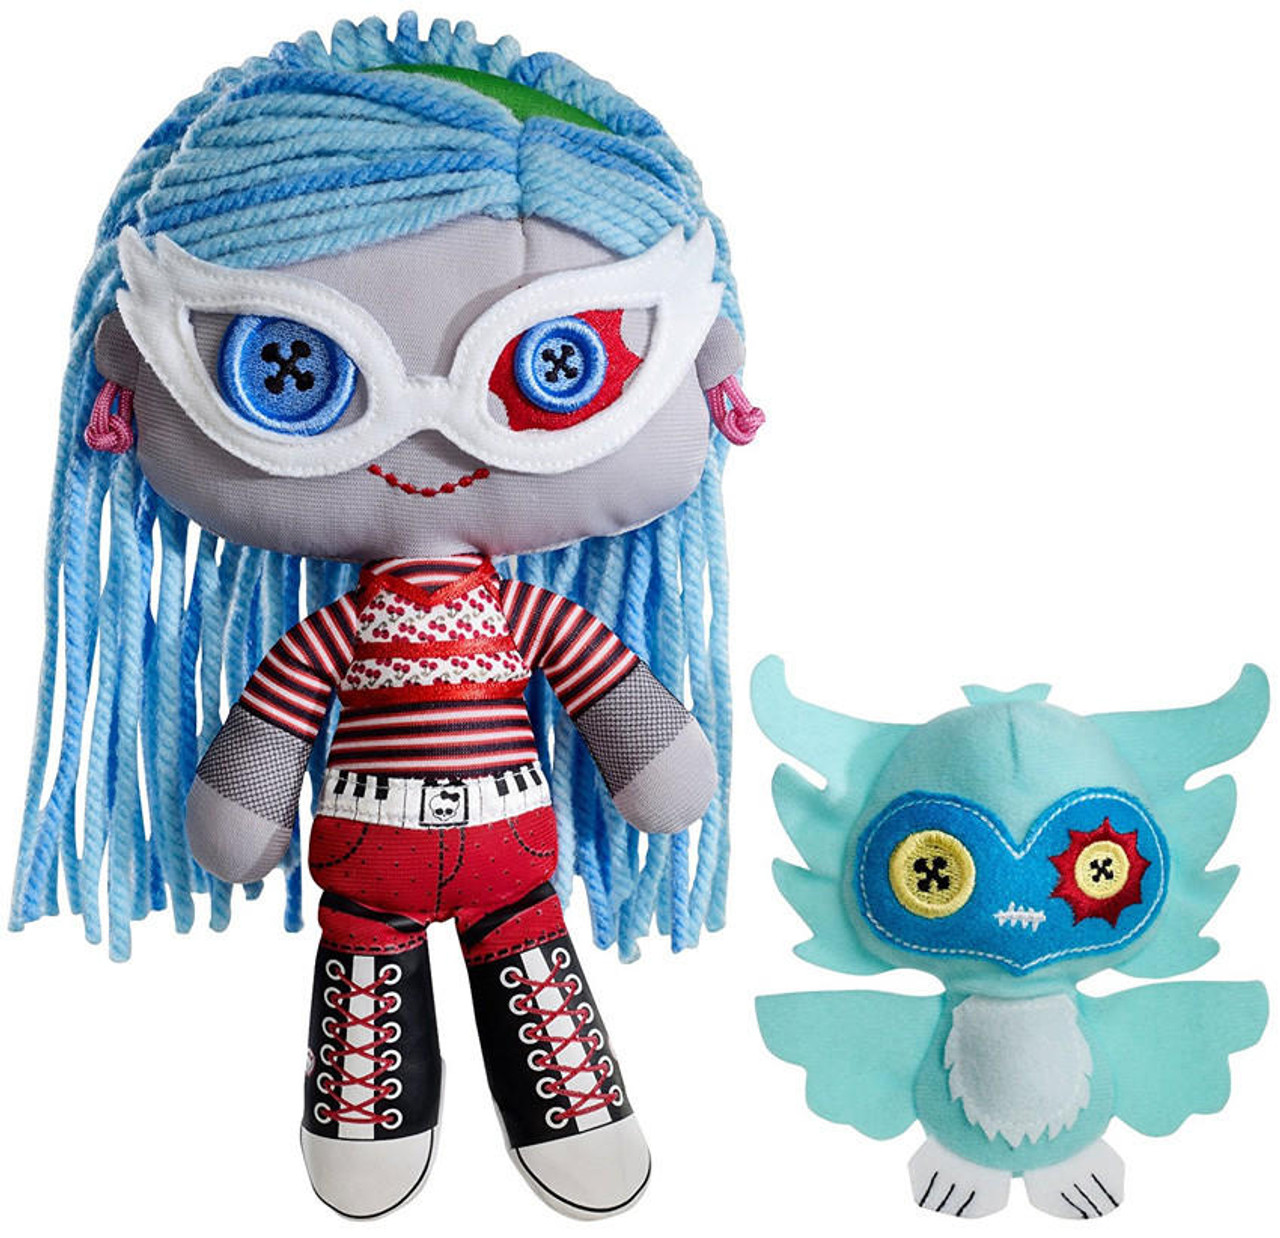 Monster High Ghoulia Yelps Doll & Scooter Set 2011 Mattel X4497 - We-R-Toys